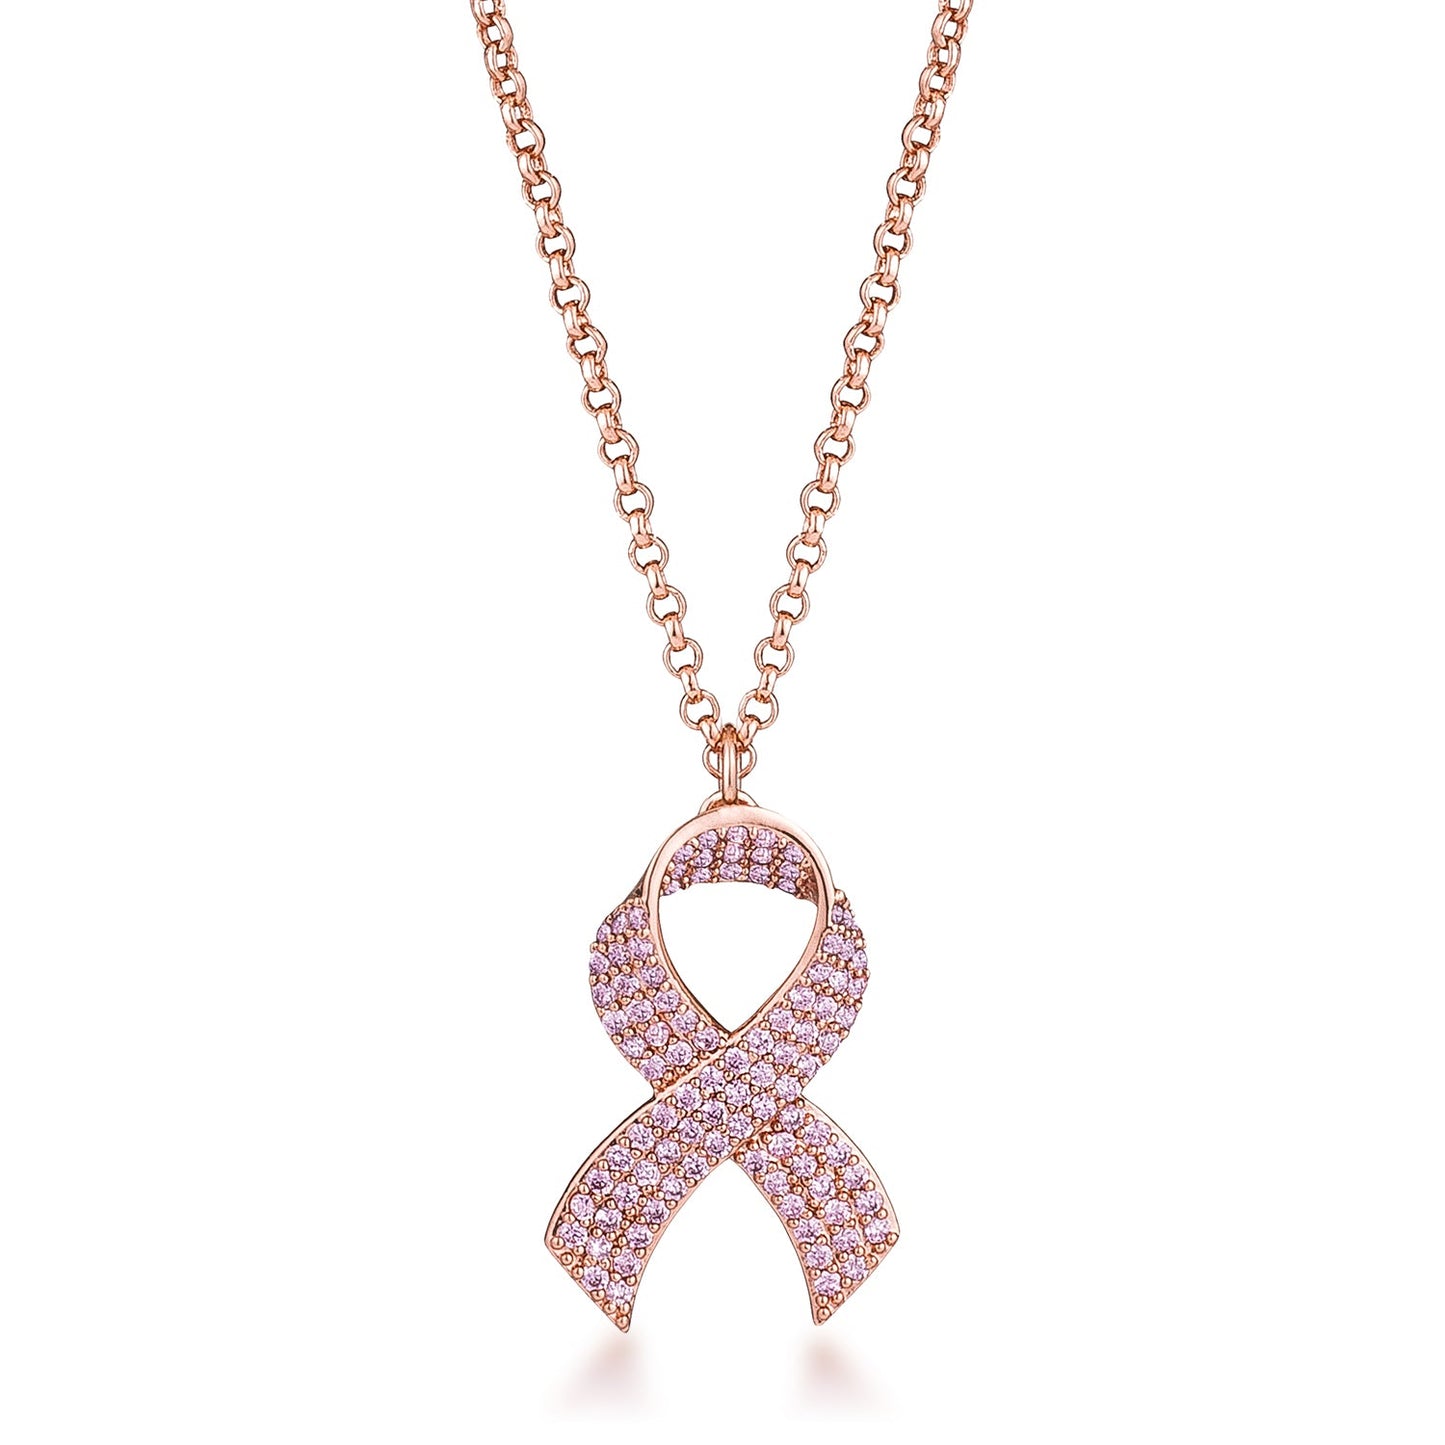 Rose Gold Plated Pink CZ Pave Ribbon Necklace